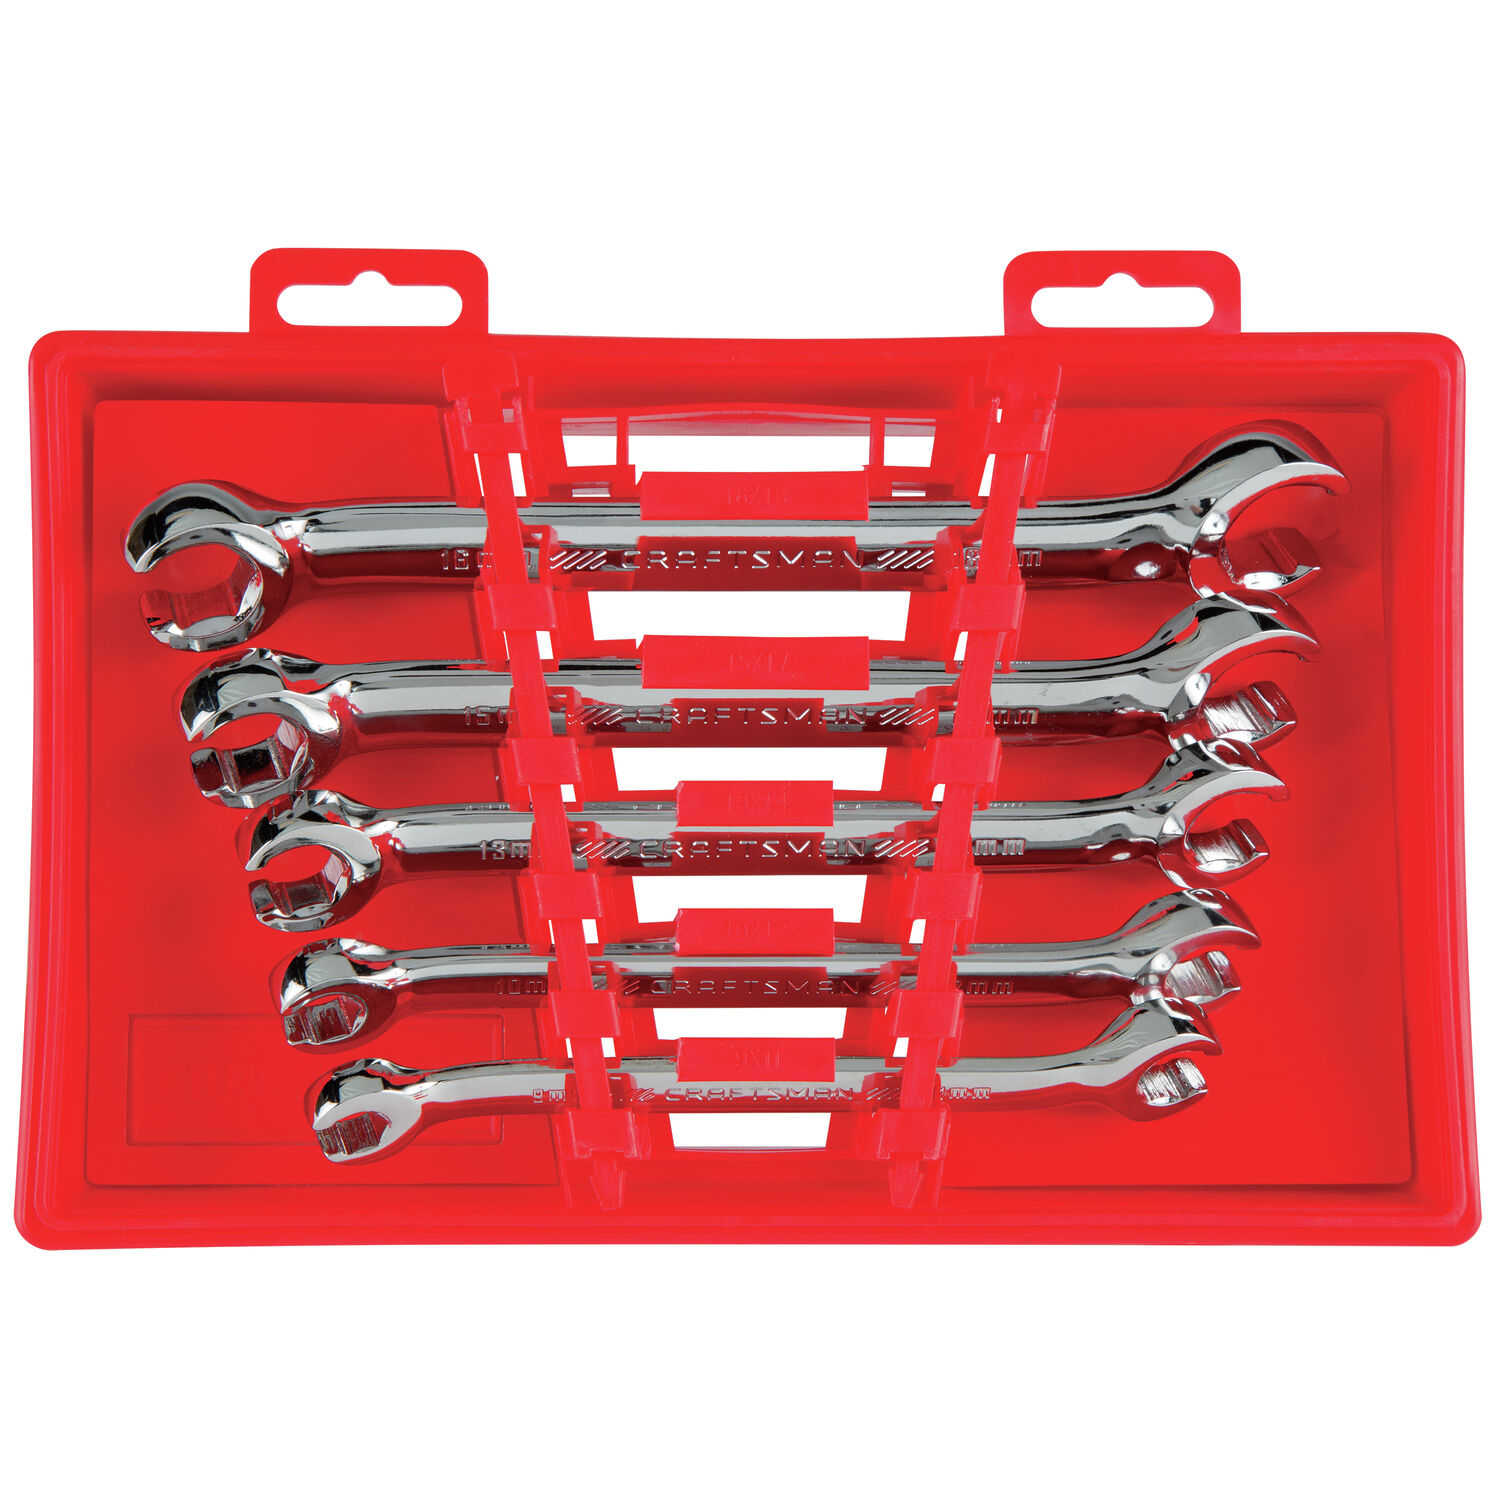 Craftsman 6 Point Metric Flare Nut Wrench Set 5 pc